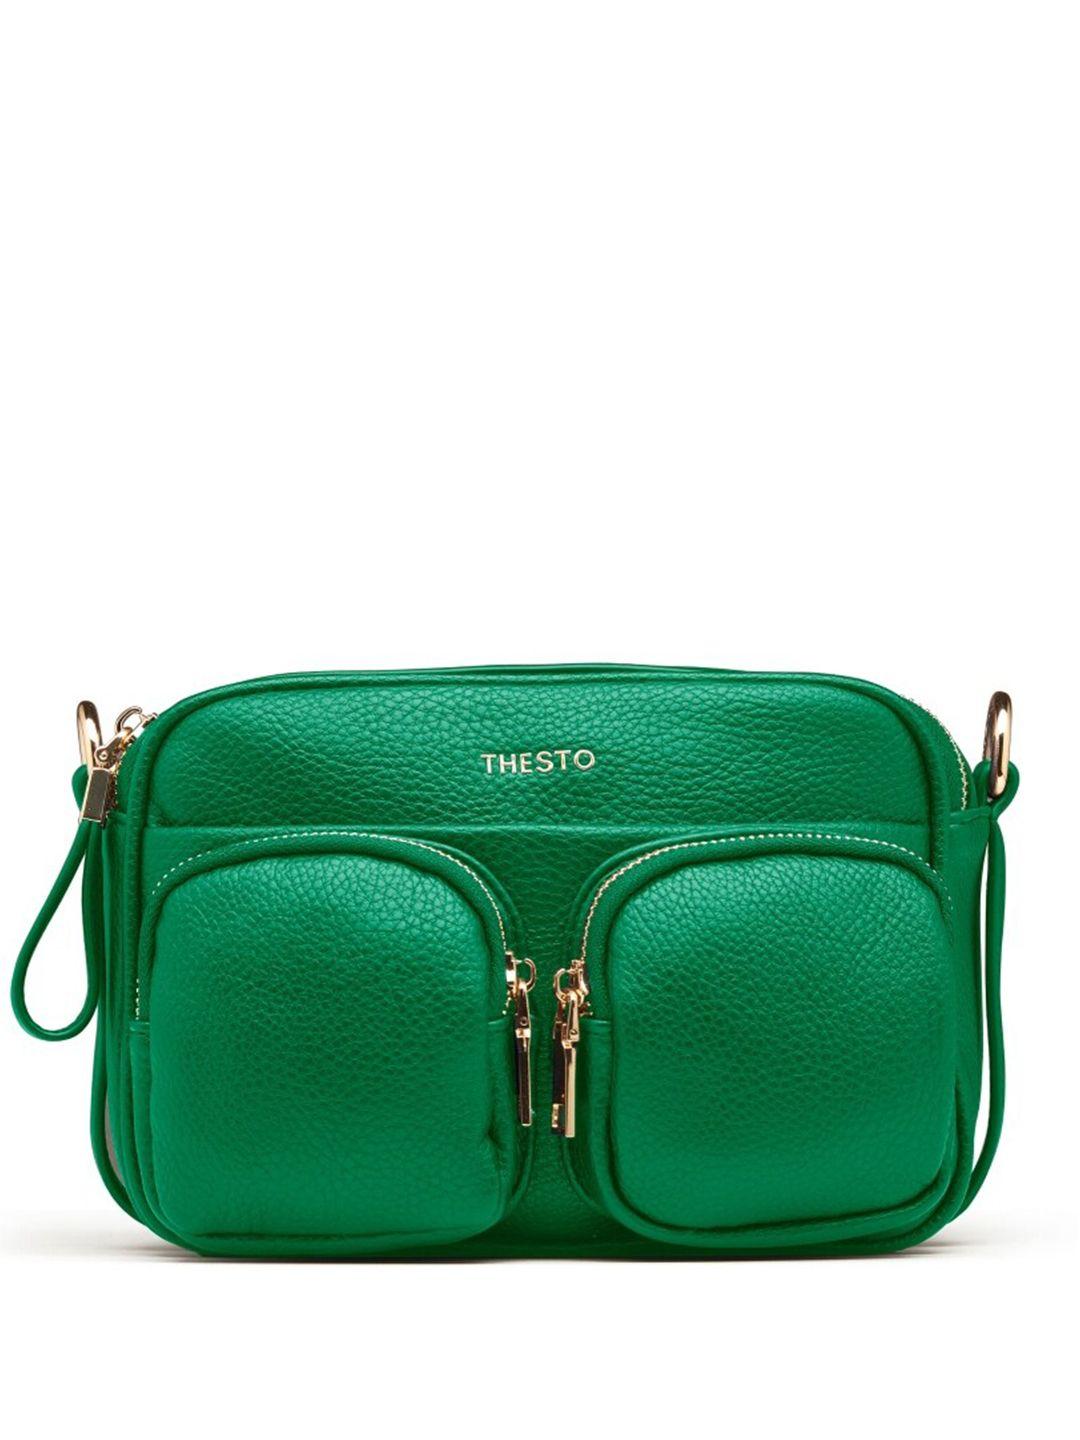 thesto textured pu multi pocketed sling bag